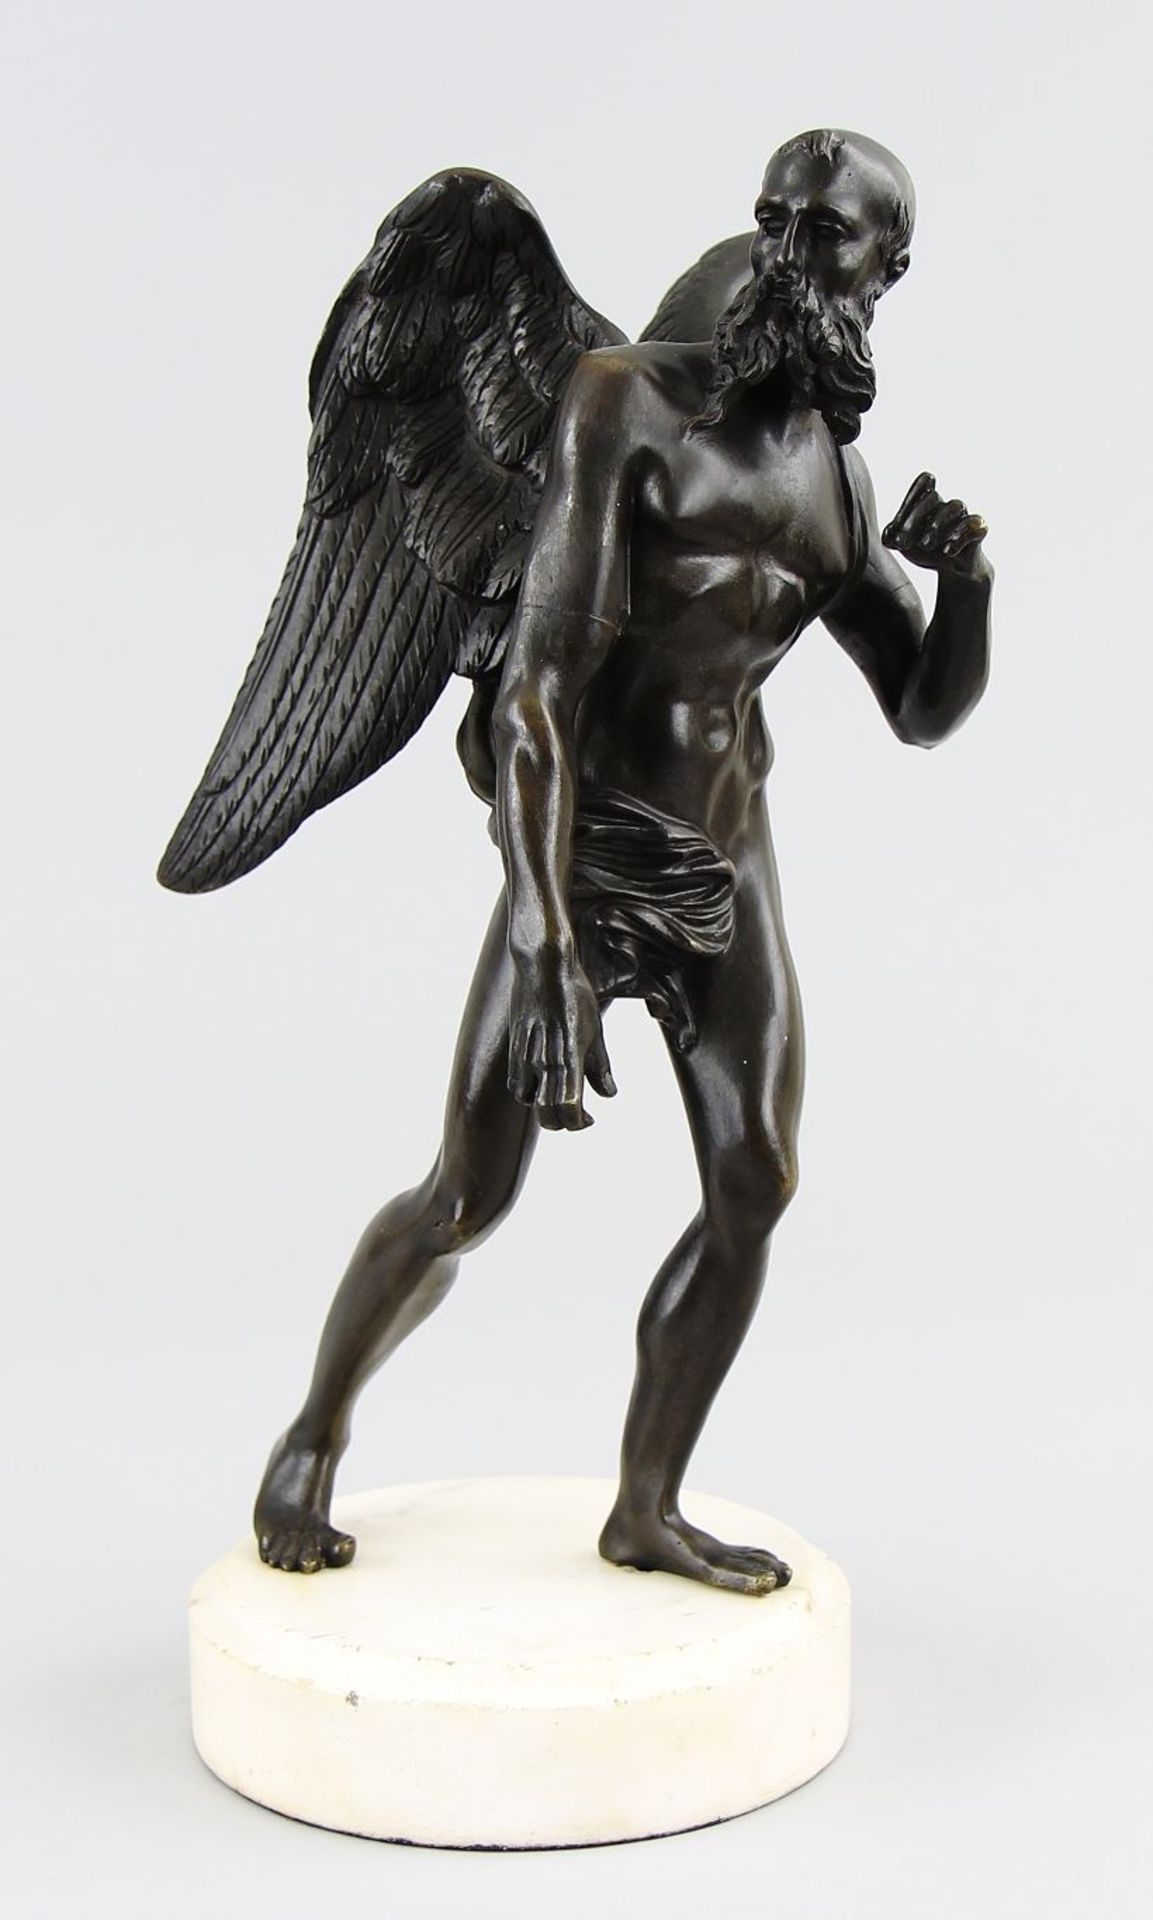 Italian sculptor of the early 19th century Figure "Chronos", patinated bronze with original marble